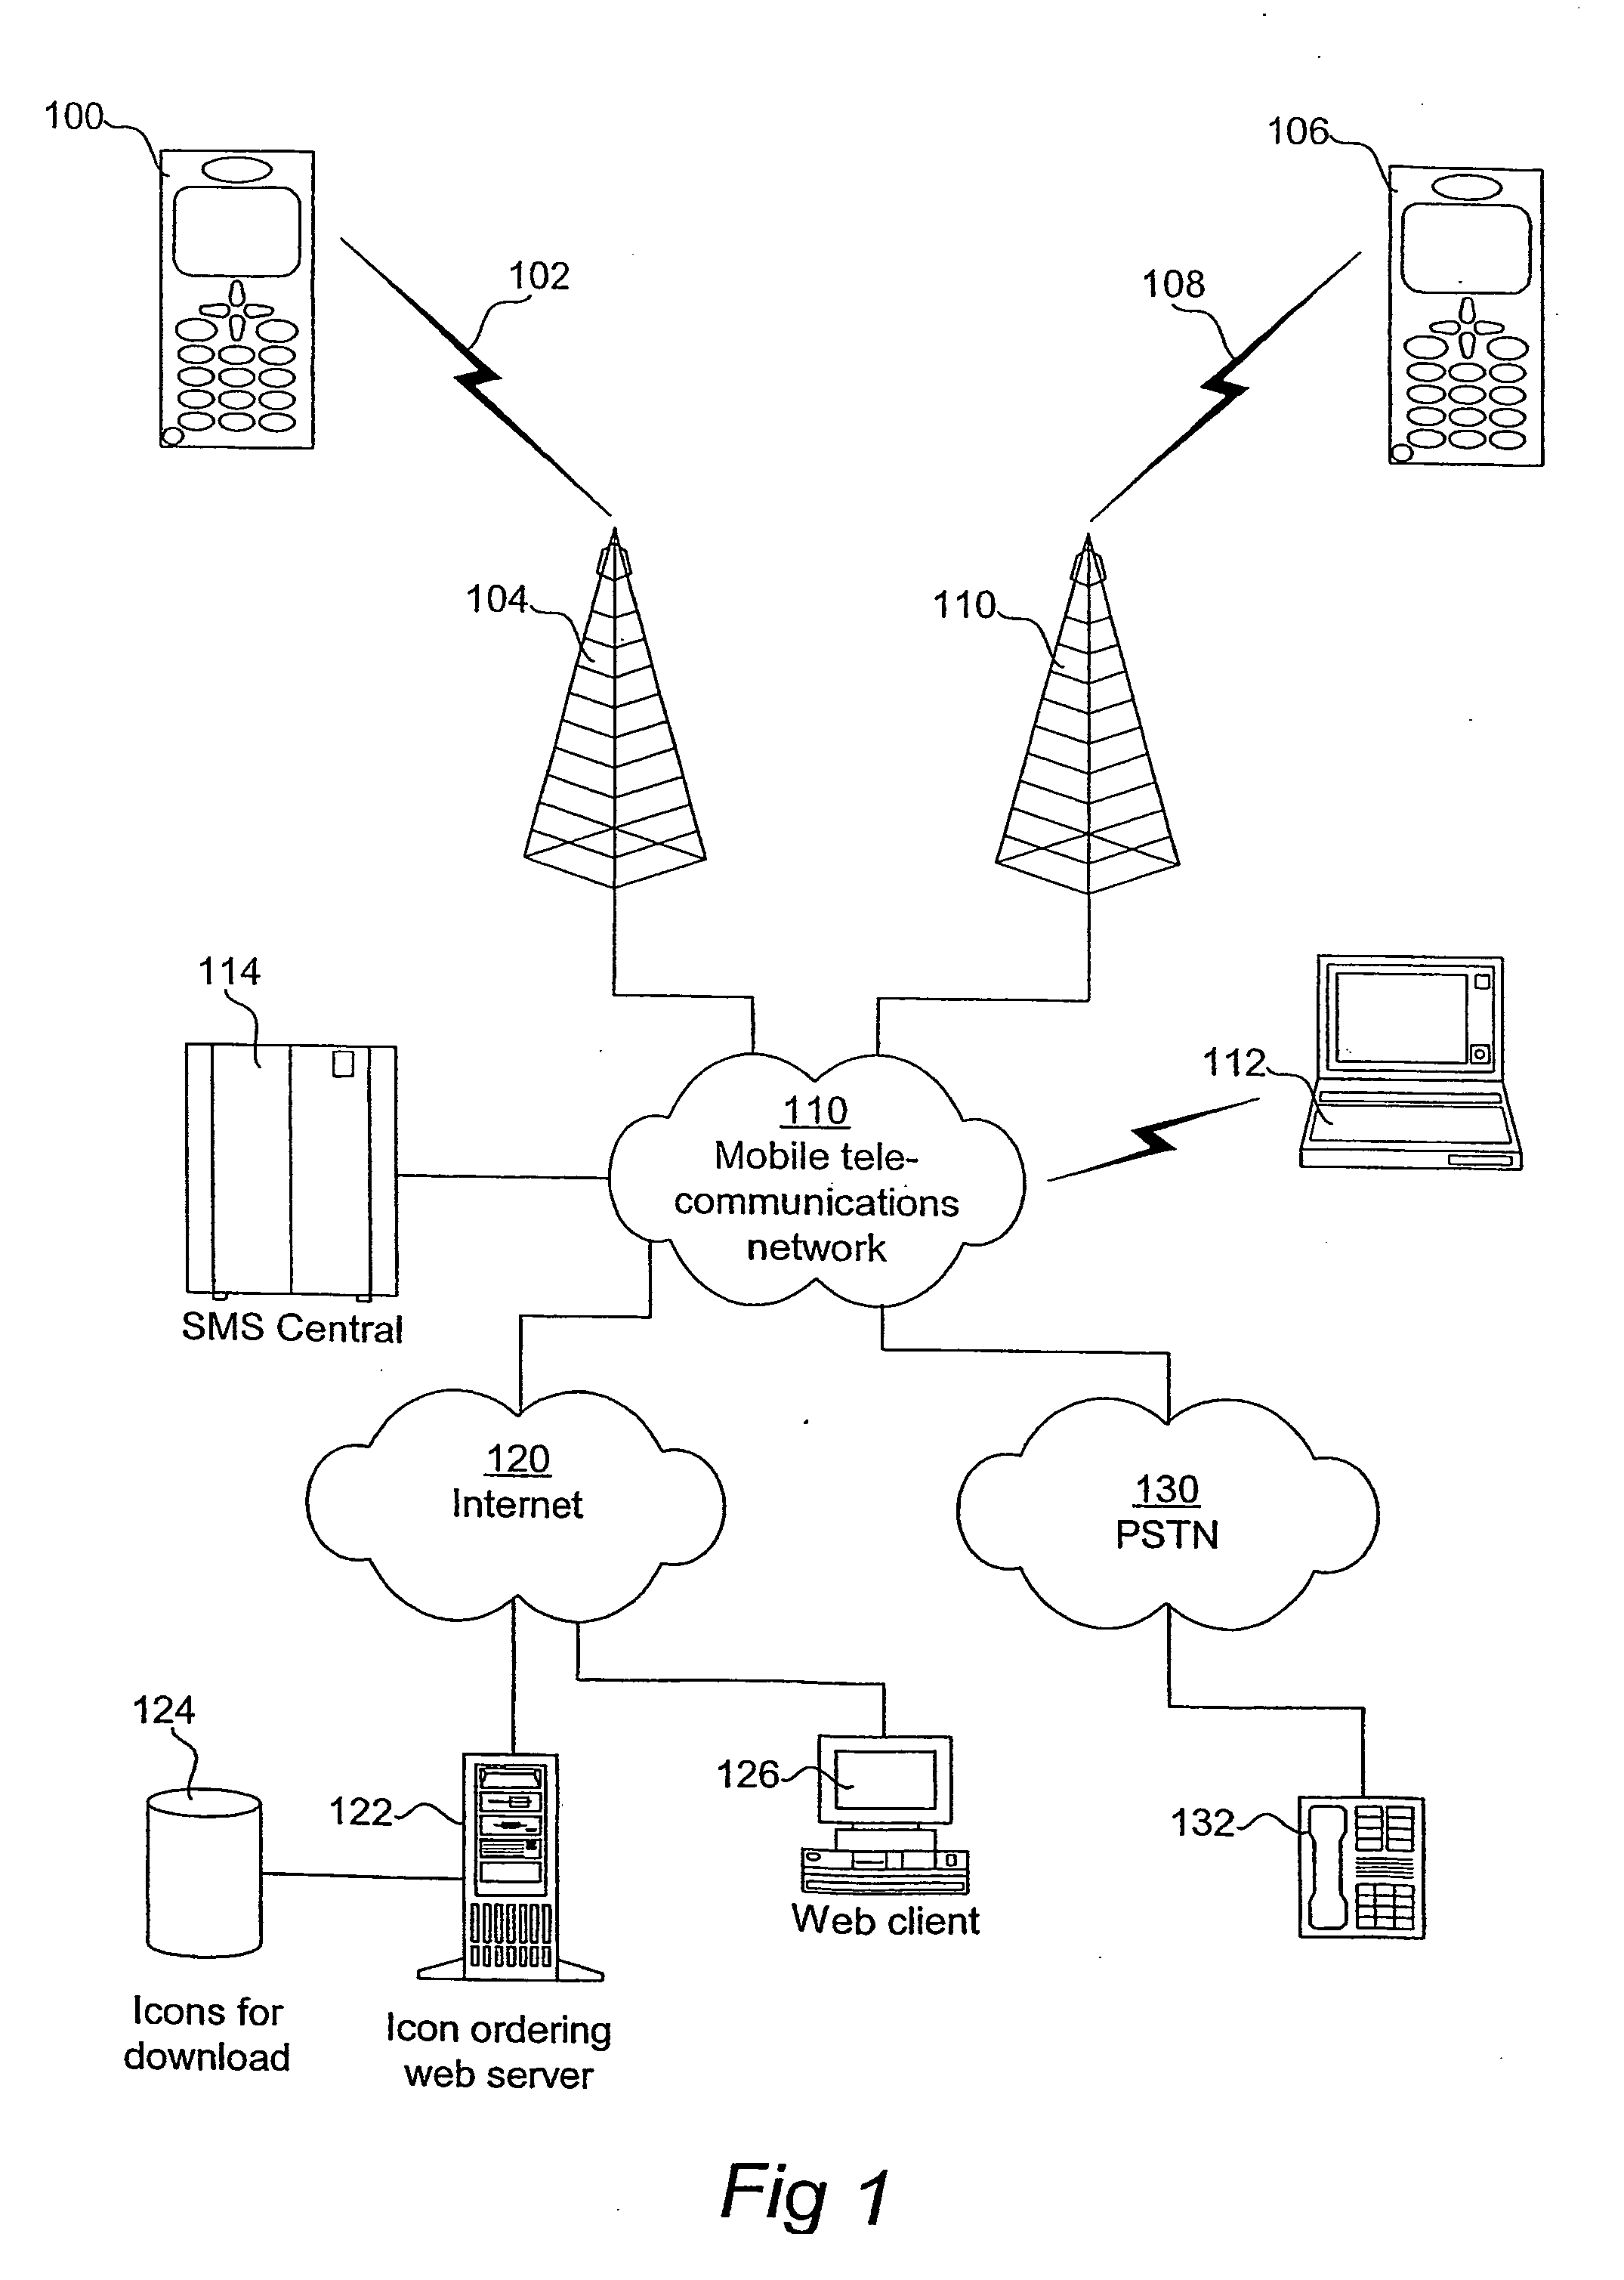 Communication apparatus and a method of indicating receipt of an electronic message, and a server, a method and a computer program product for providing a computerized icon ordering service